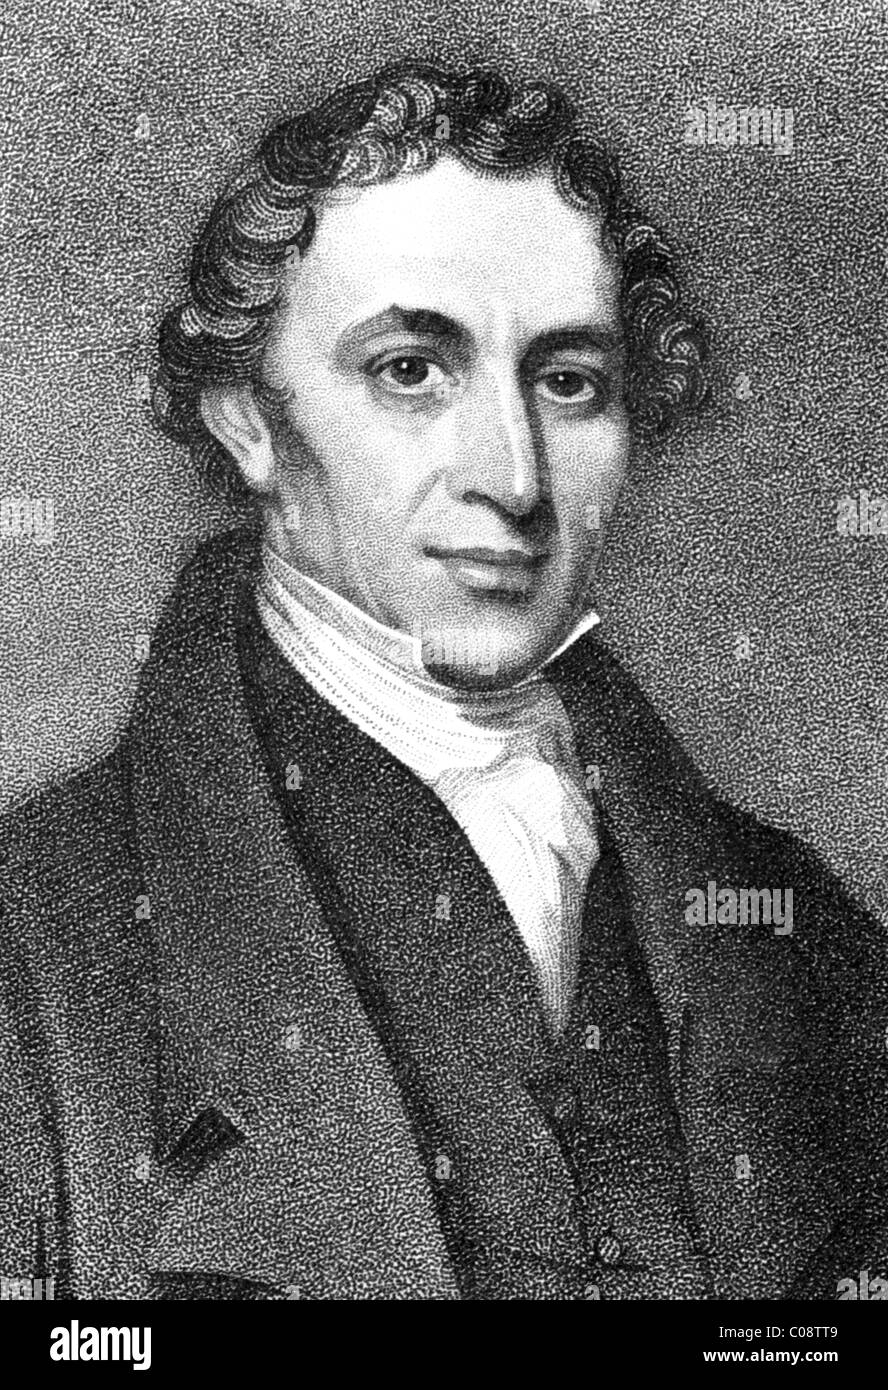 William Ellis (1794-1872) on engraving from the 1800s. English missionary and author. Stock Photo